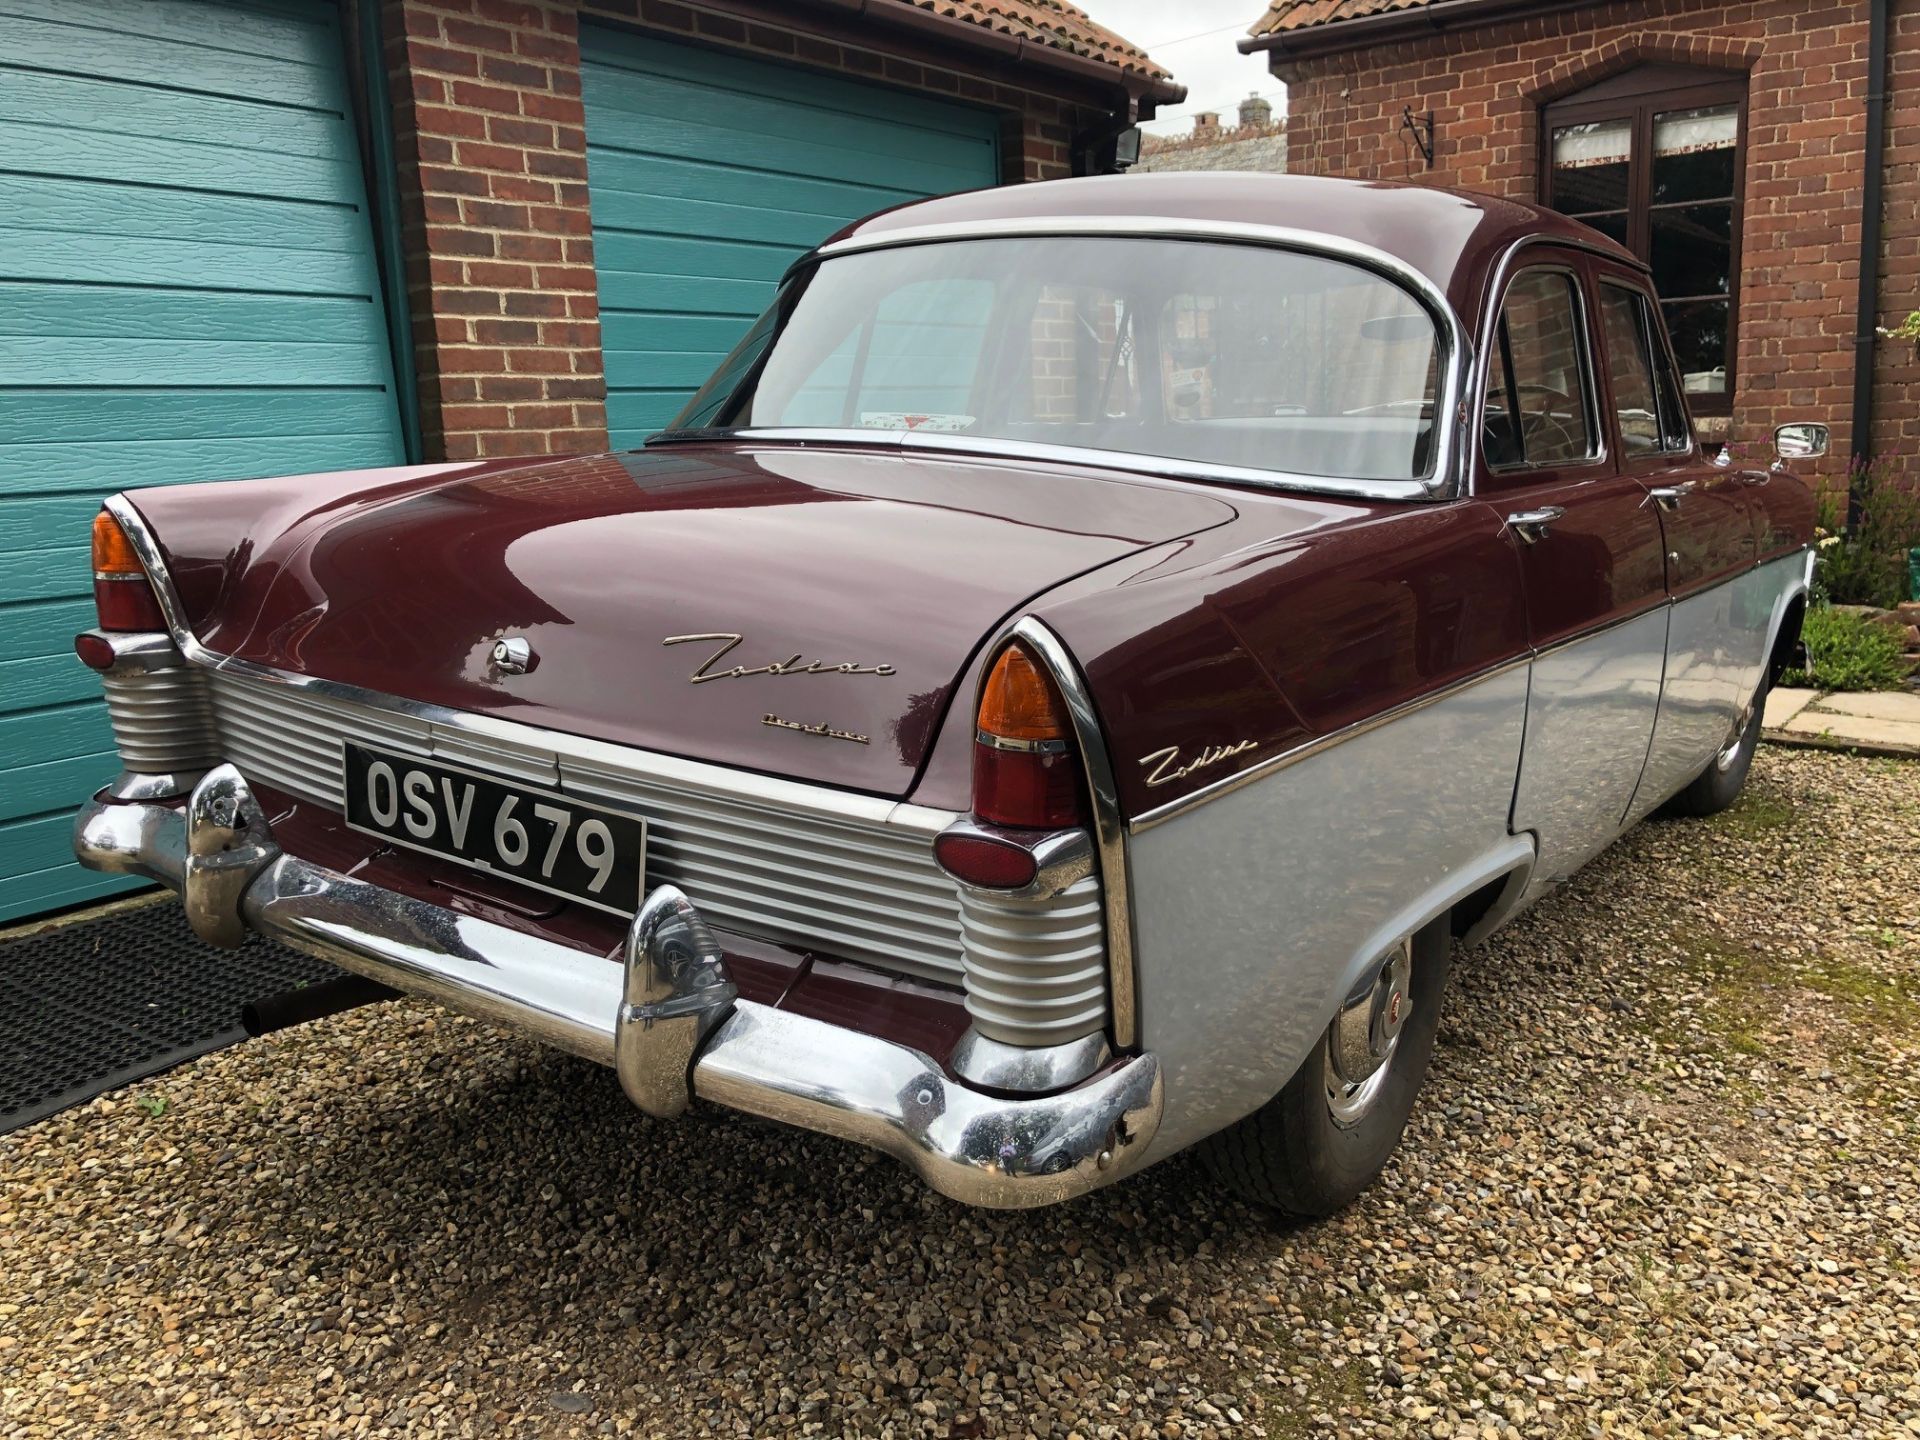 1960 Ford Zodiac Registration number OSV 679 Chassis number 206E306134 Maroon over grey Vinyl and - Image 27 of 70